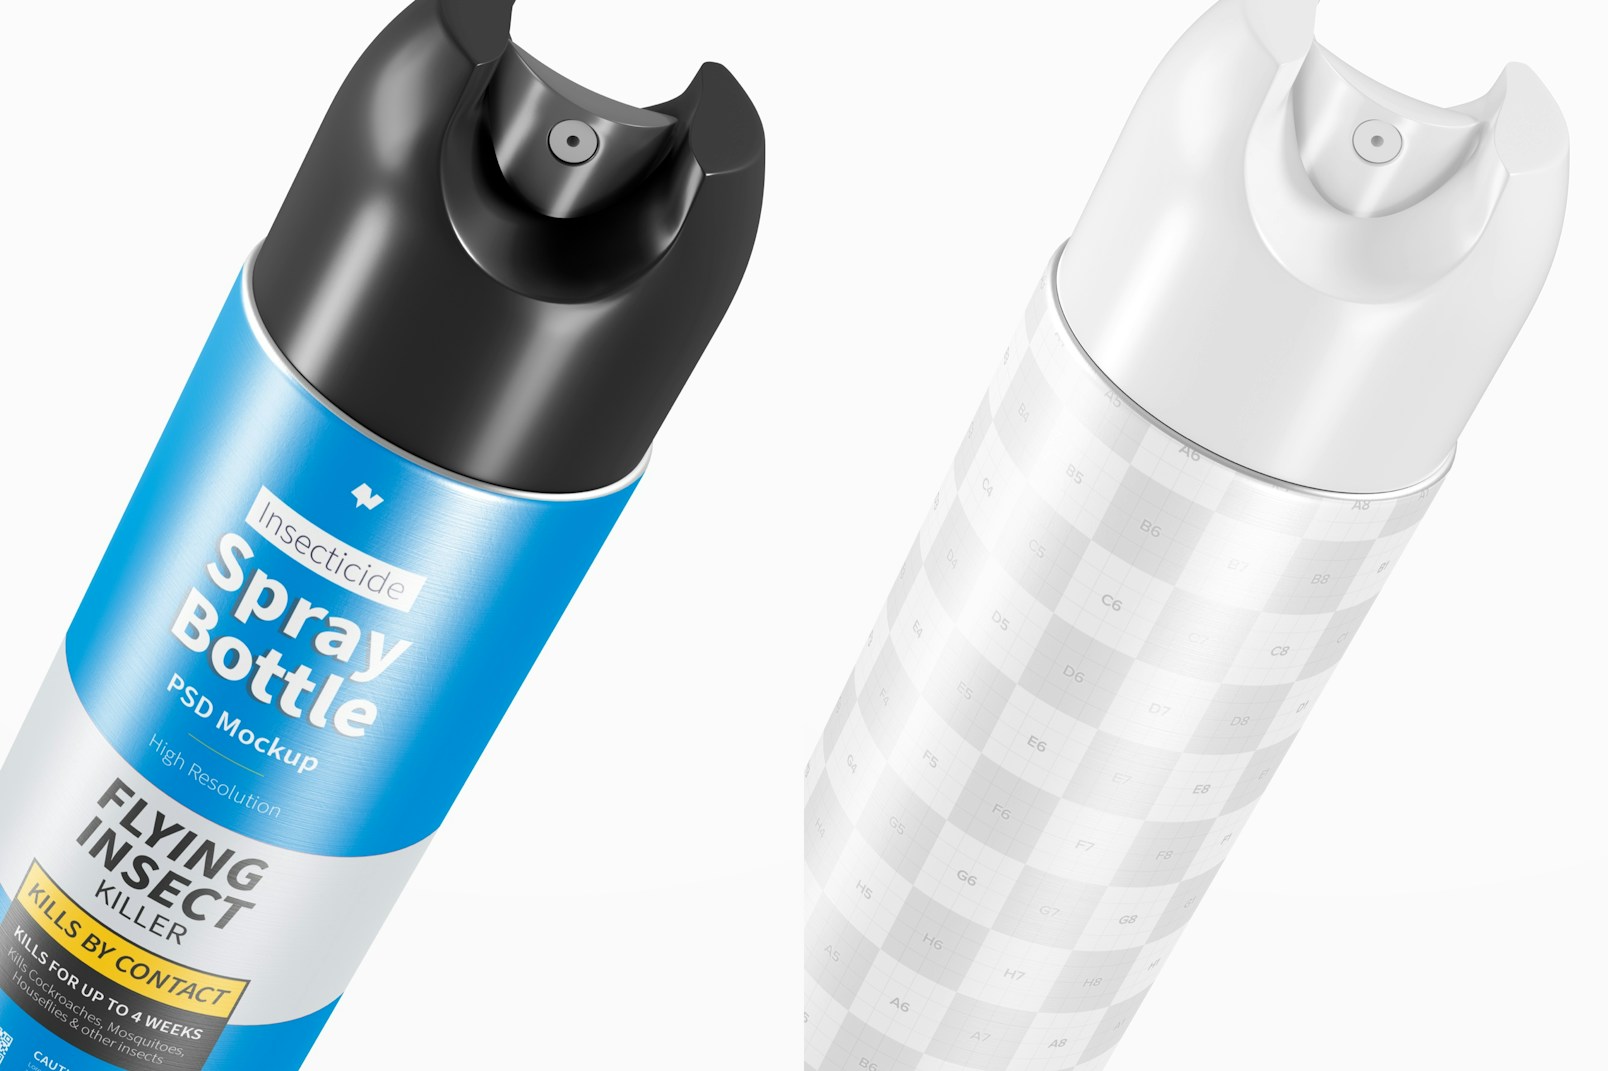 Insecticide Spray Bottle Mockup, Close Up